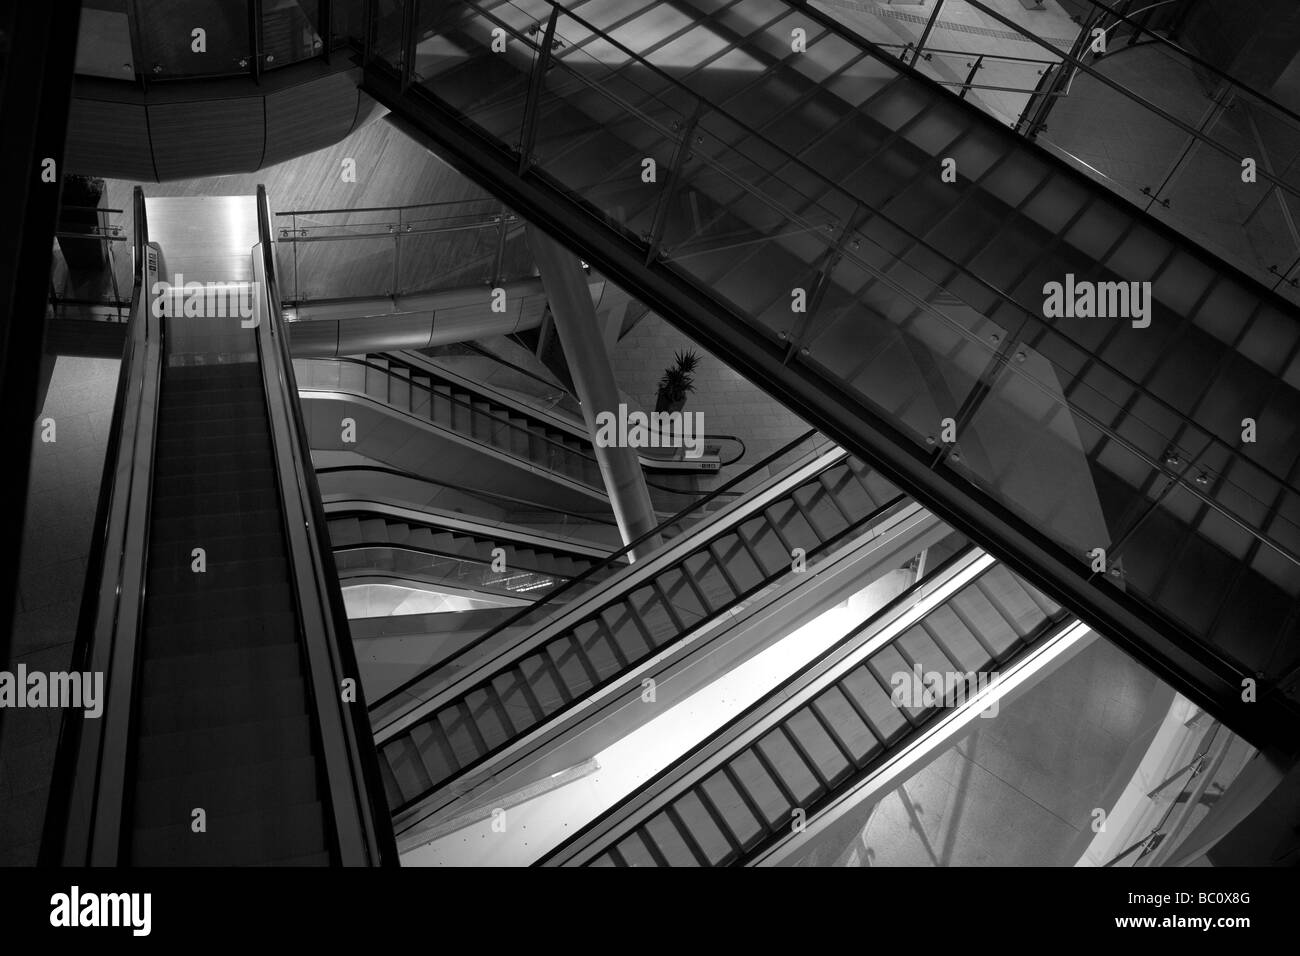 Stairs under the Dome of the Victoria Square (commercial center) in Belfast, Northern Ireland, United Kingdom, Europe Stock Photo